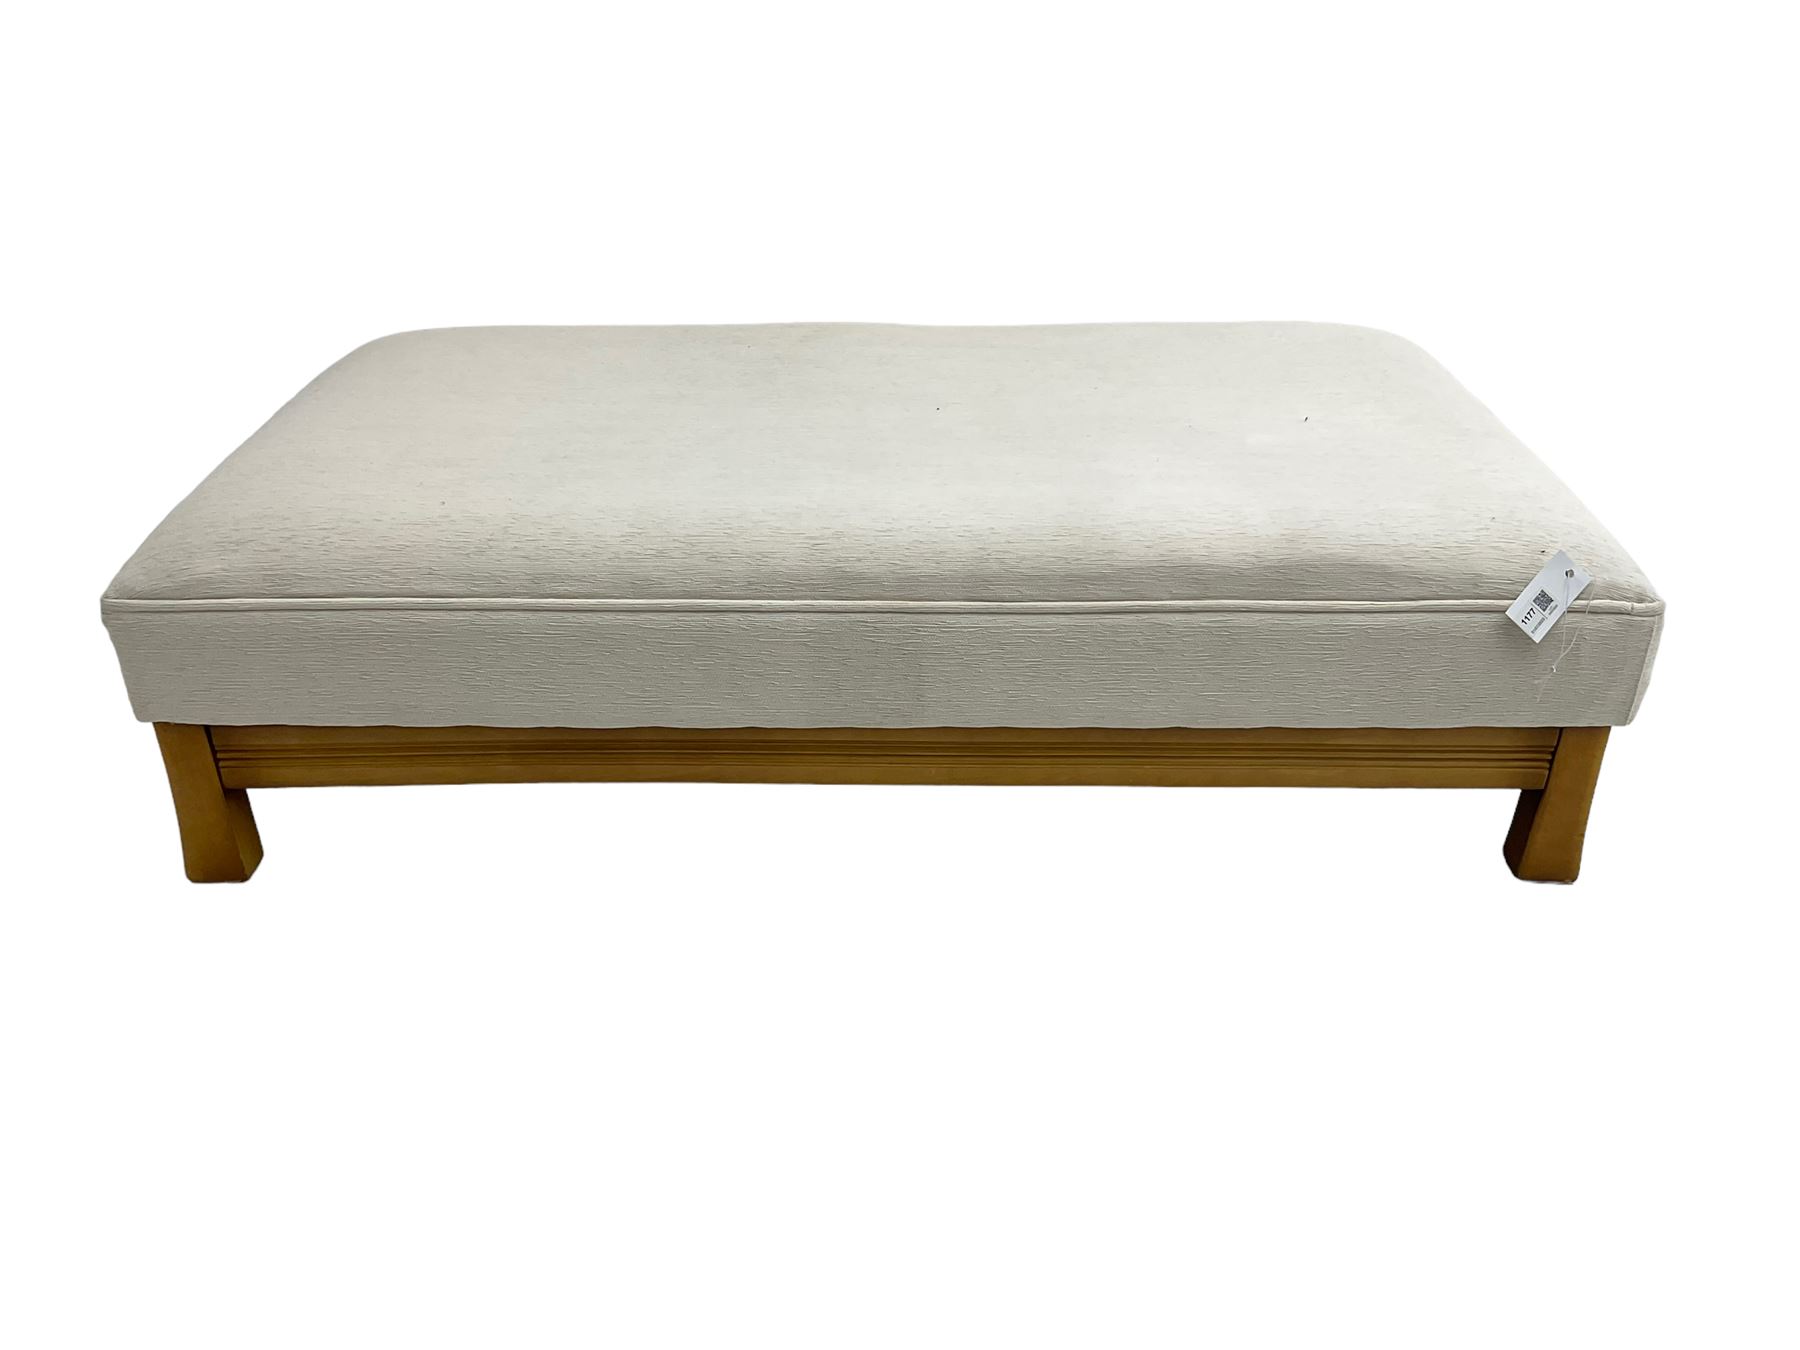 Large rectangular stained beech footstool upholstered in cream fabric - Image 6 of 6